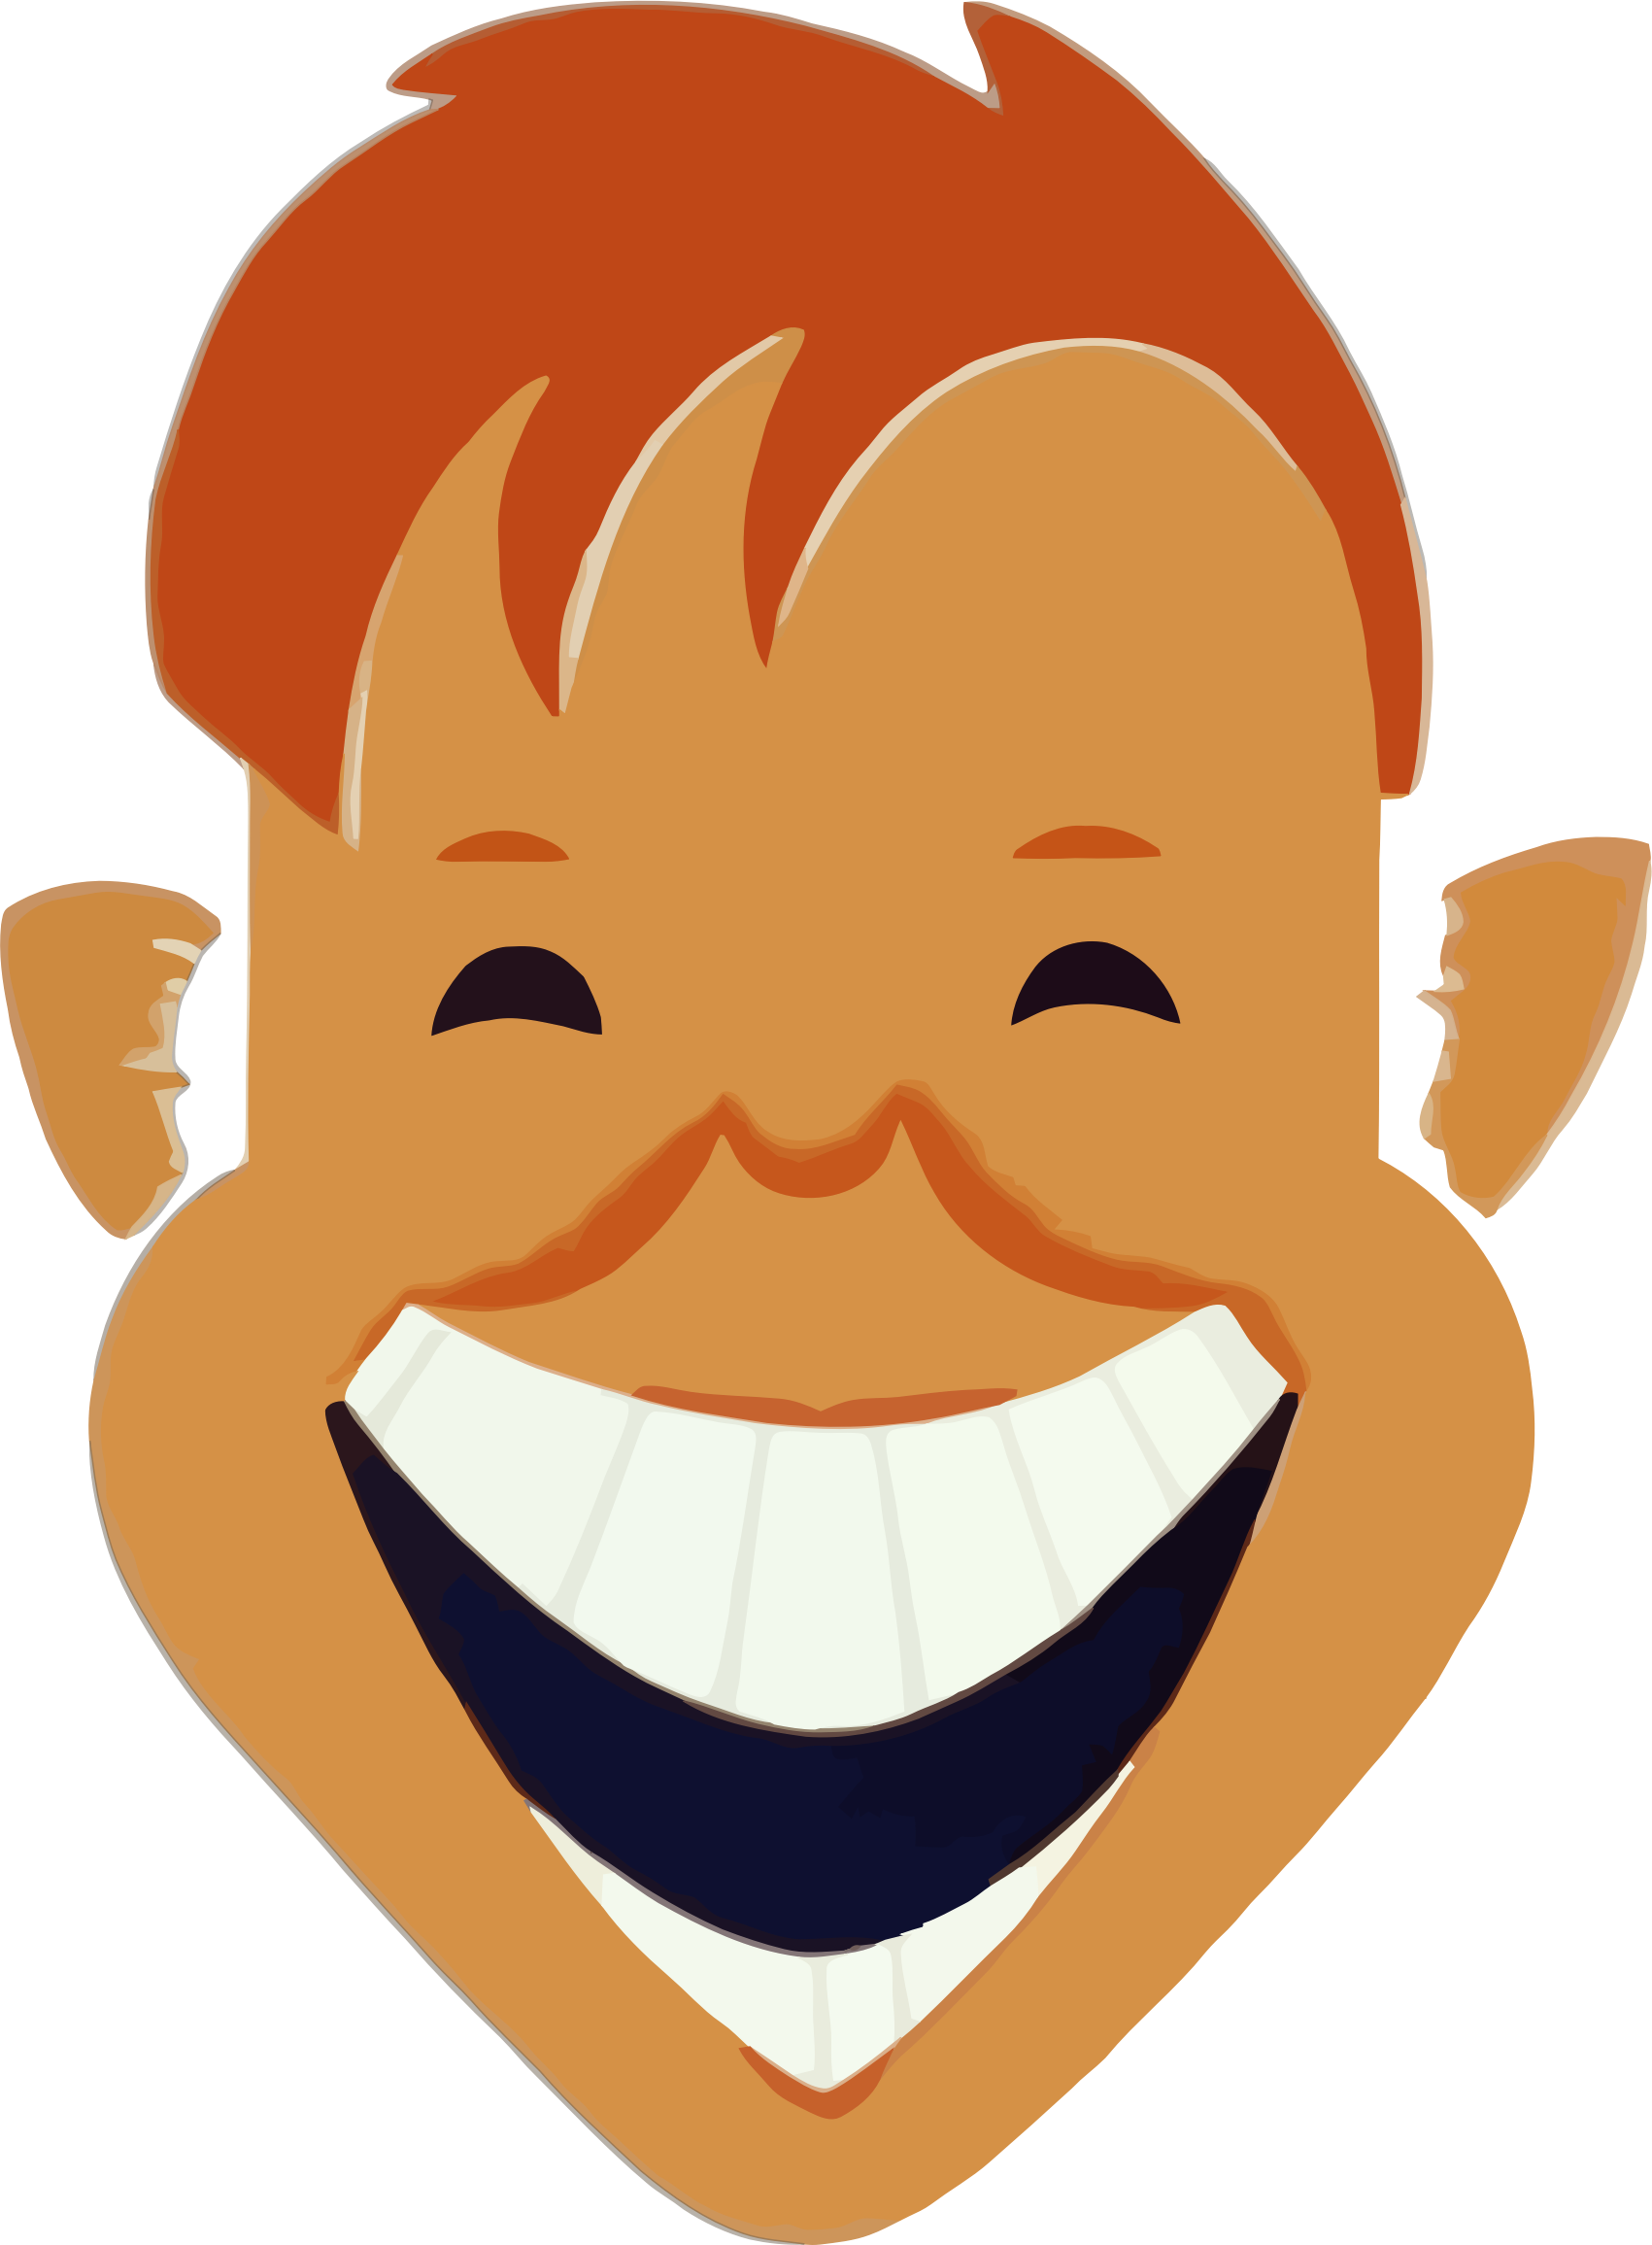 Laughing Boy Clipart Clipground